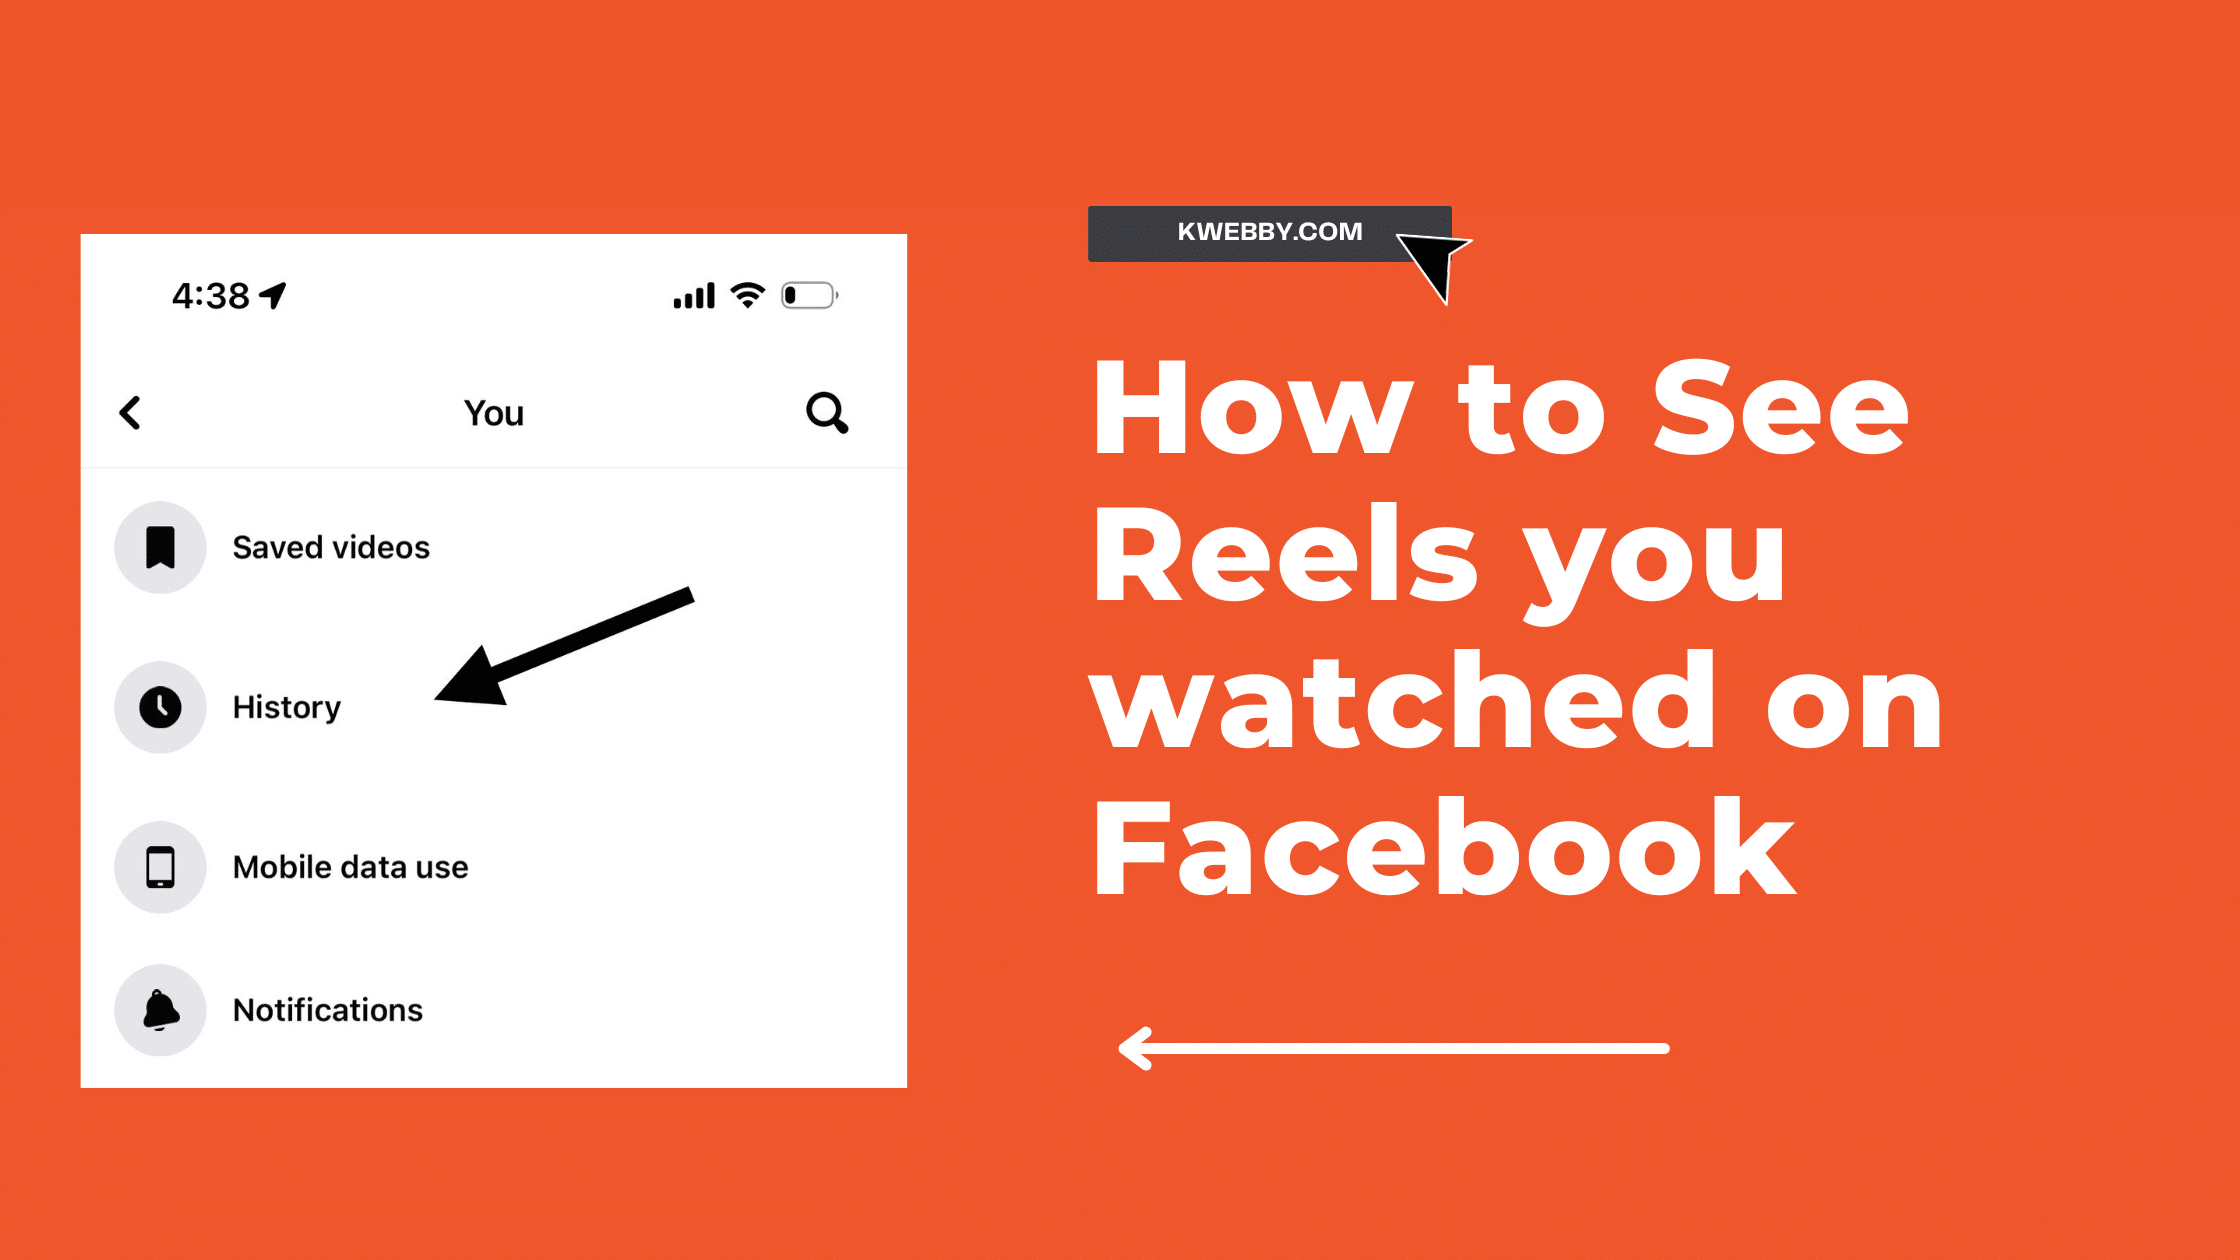 How to See Reels you watched on Facebook (iOS, Android, PC)